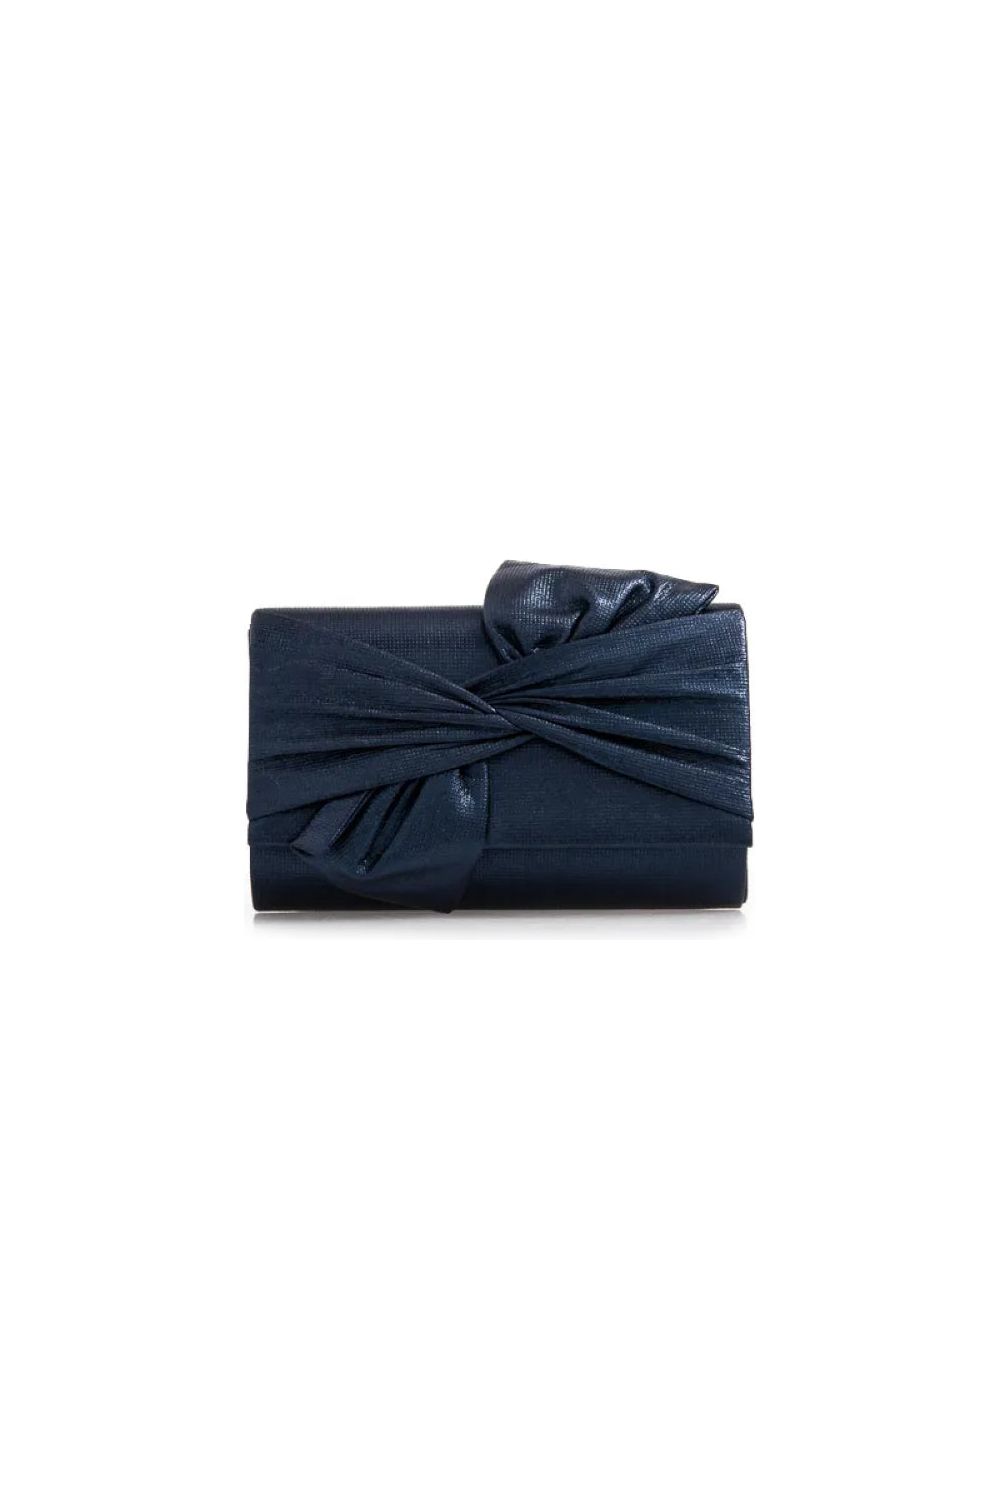 Navy Evening Clutch Bag With Bow Detail ALW2562